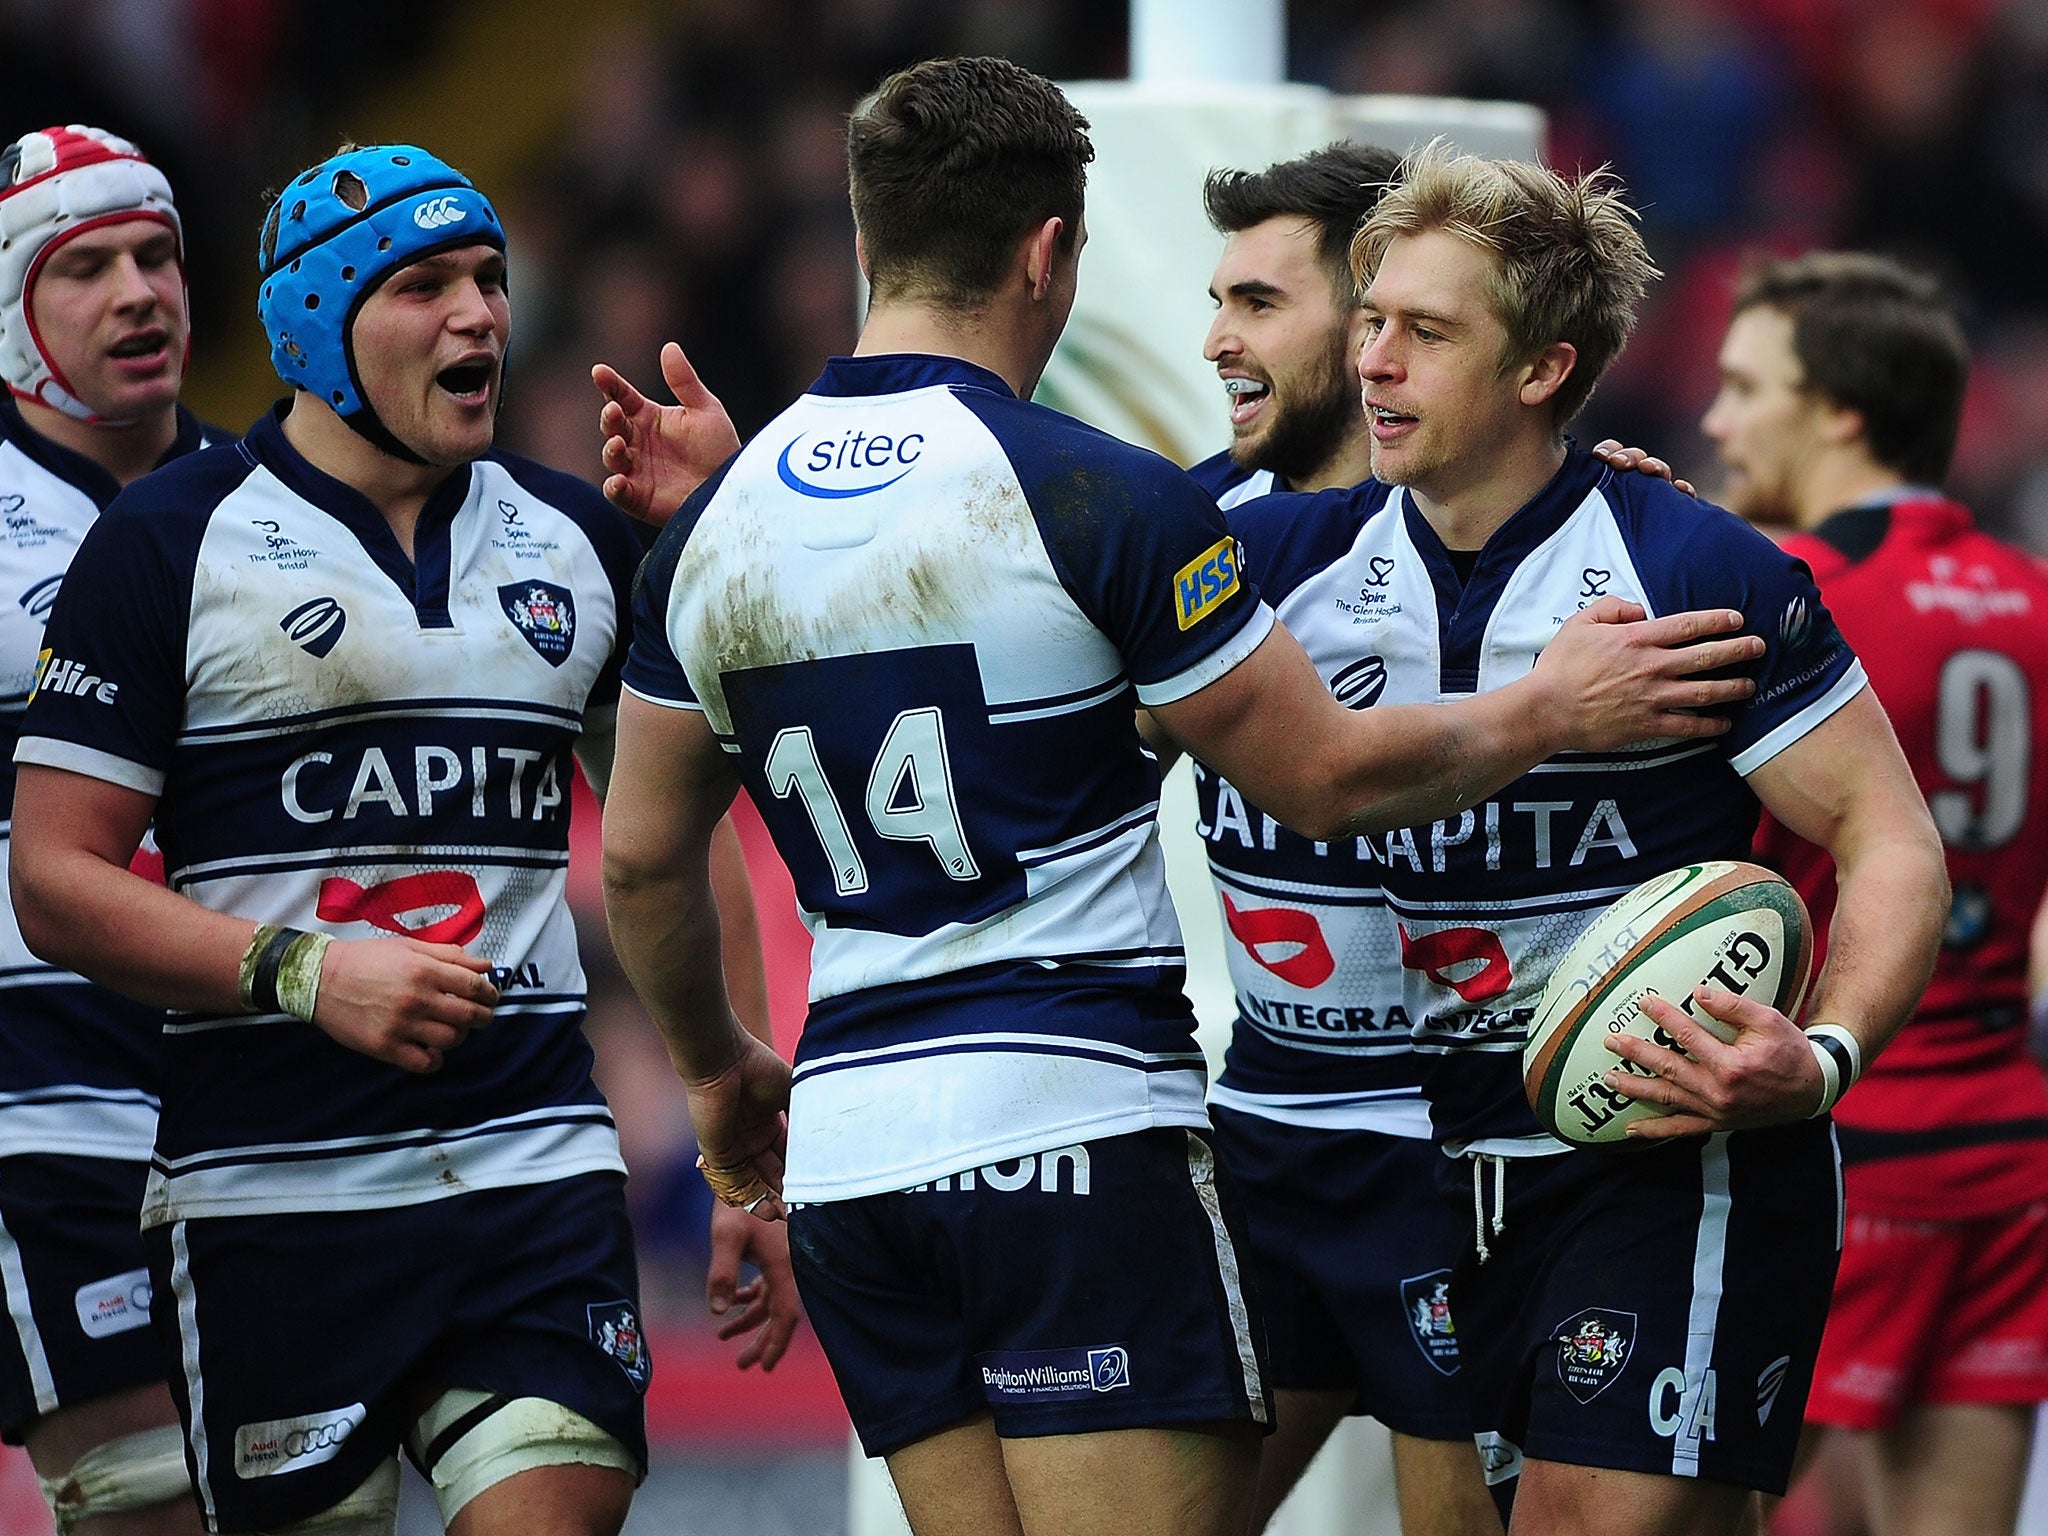 Bristol are one of three teams who could win promotion to the Premiership